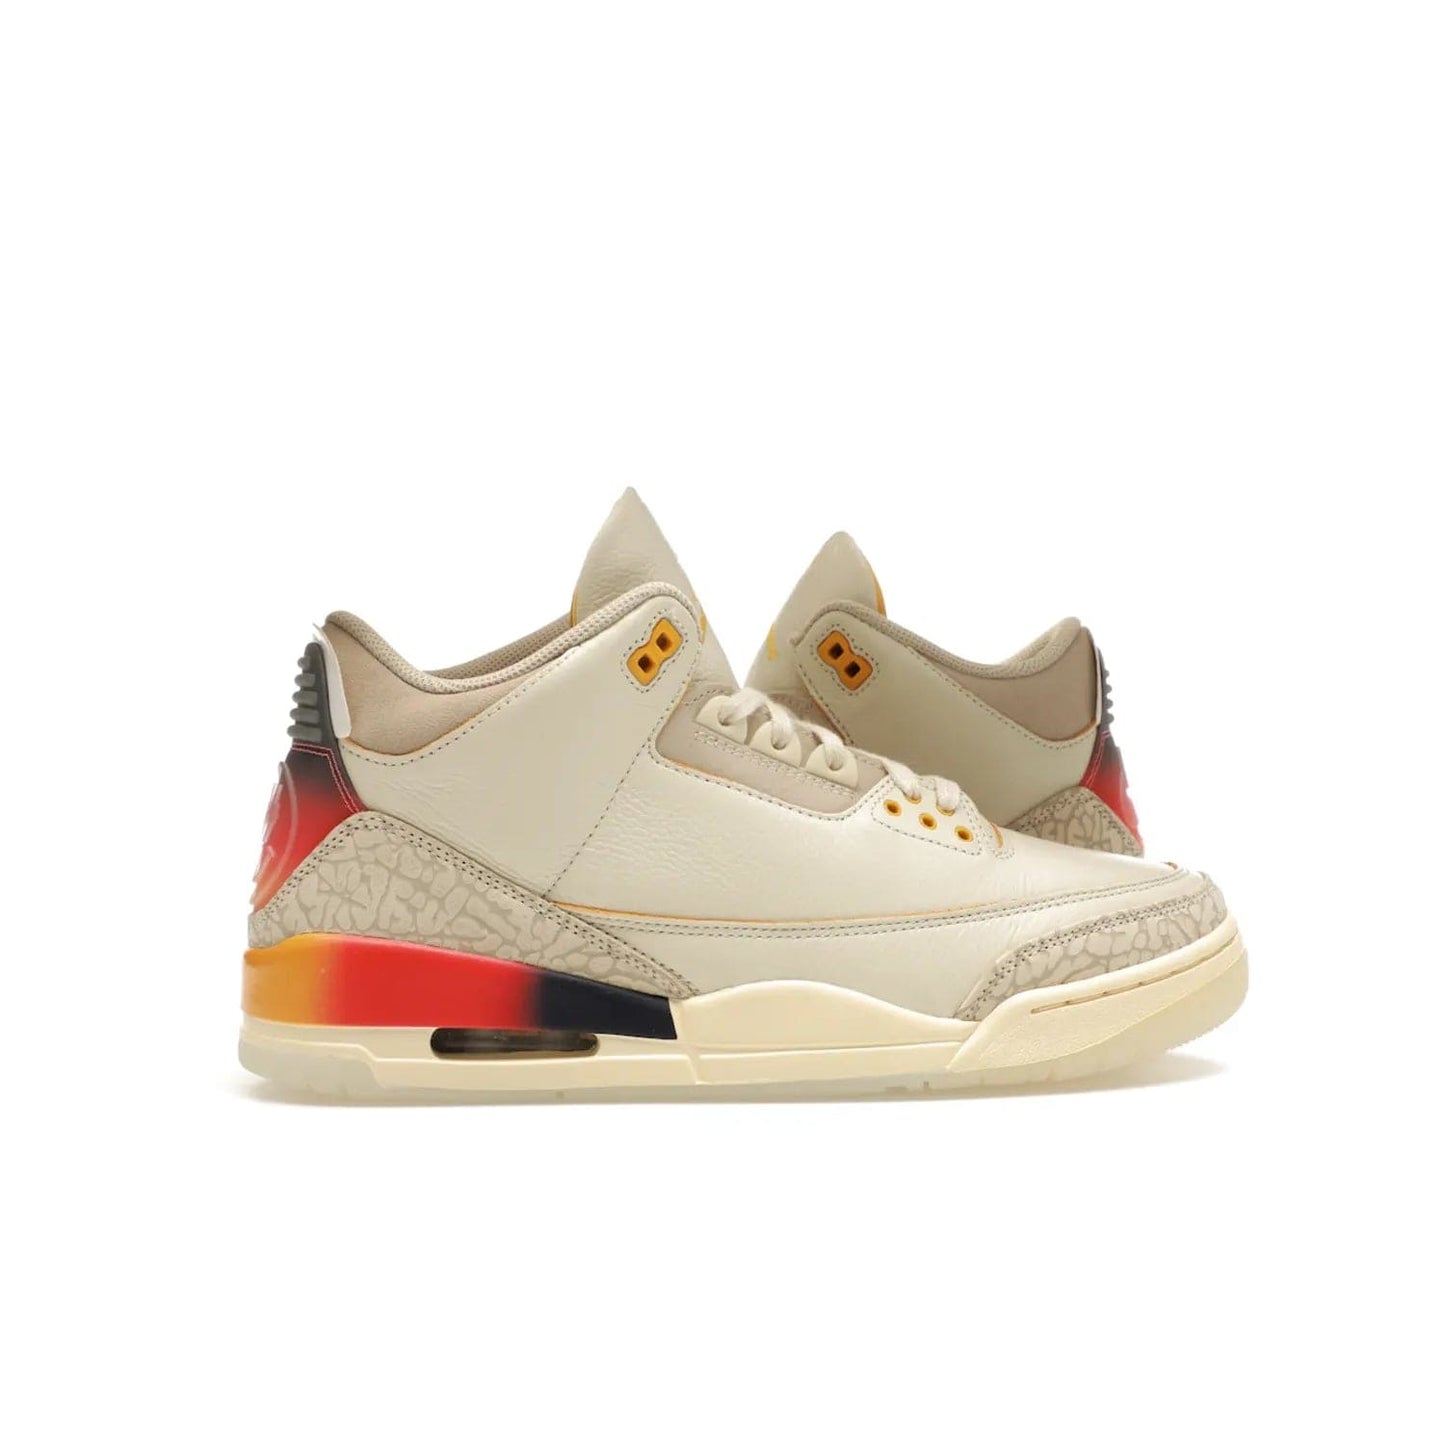 Jordan 3 Retro SP J Balvin Medellín Sunset - Image 36 - Only at www.BallersClubKickz.com - J Balvin x Jordan 3 Retro SP: Celebrate the joy of life with a colorful, homage to the electrifying reggaeton culture and iconic Jordan 3. Limited edition, Sept. 23. $250.